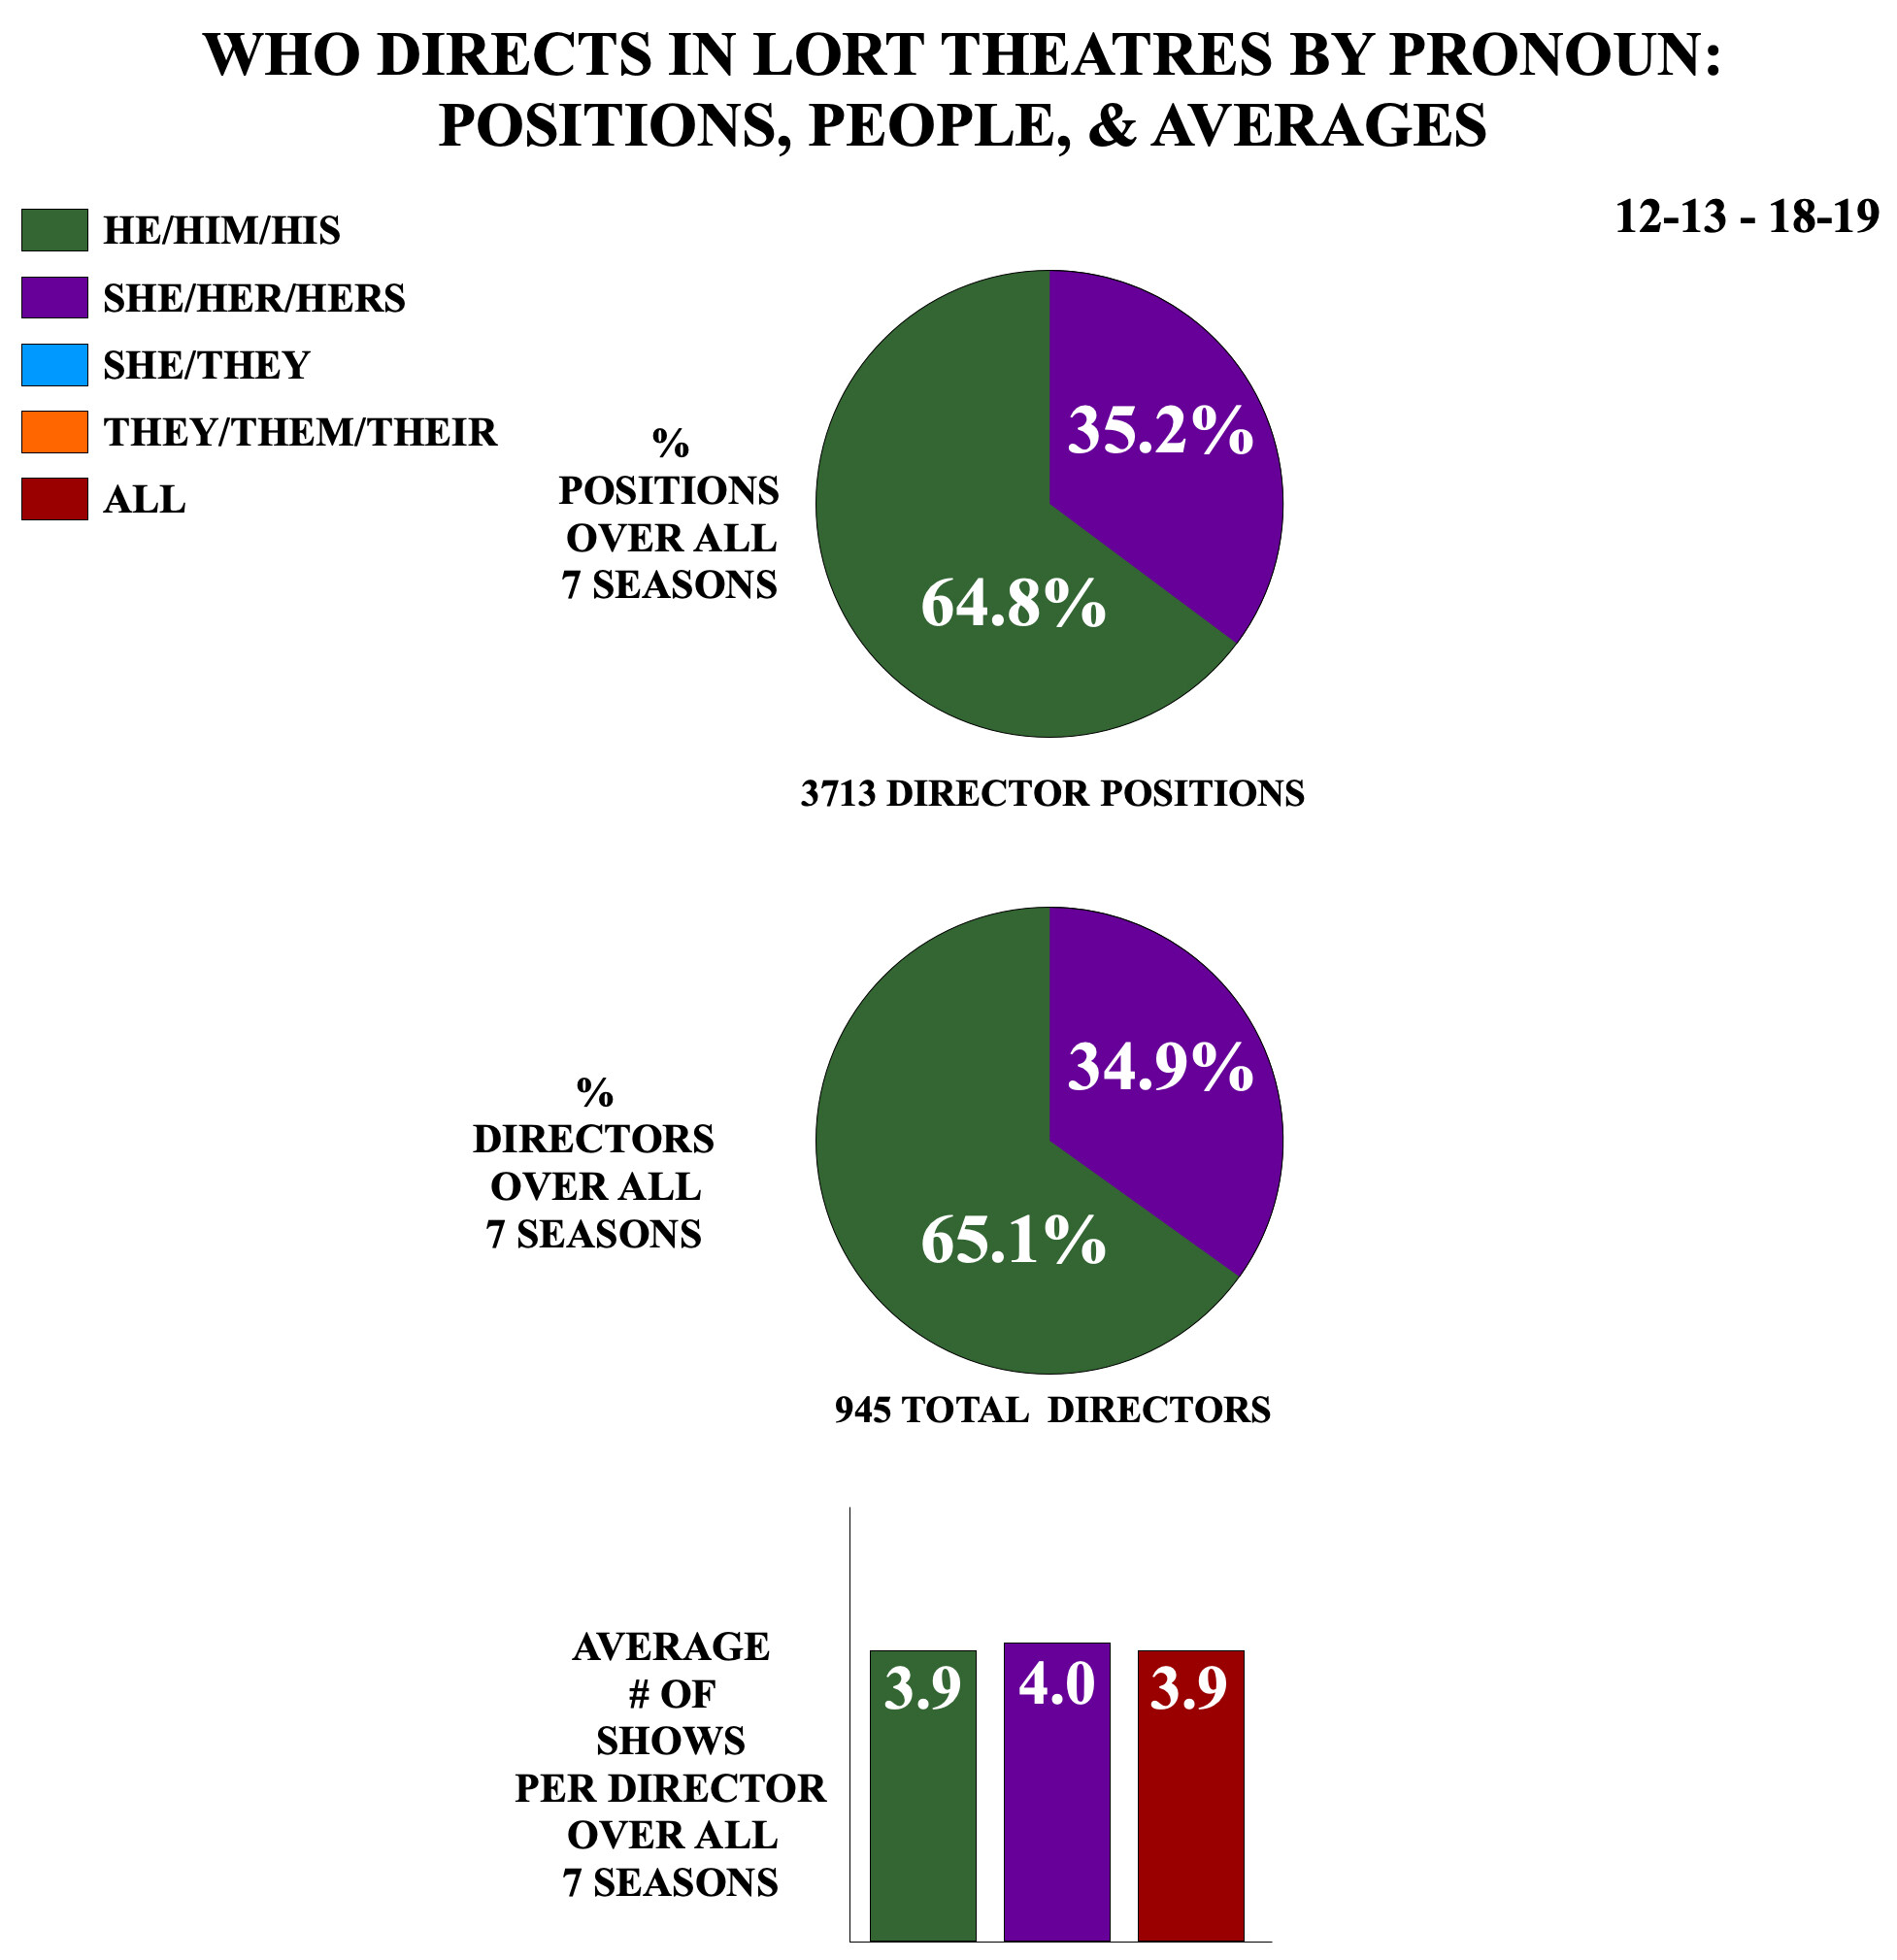 Who Directs in LORT Theatres by Pronoun: Positions, People, & Averages